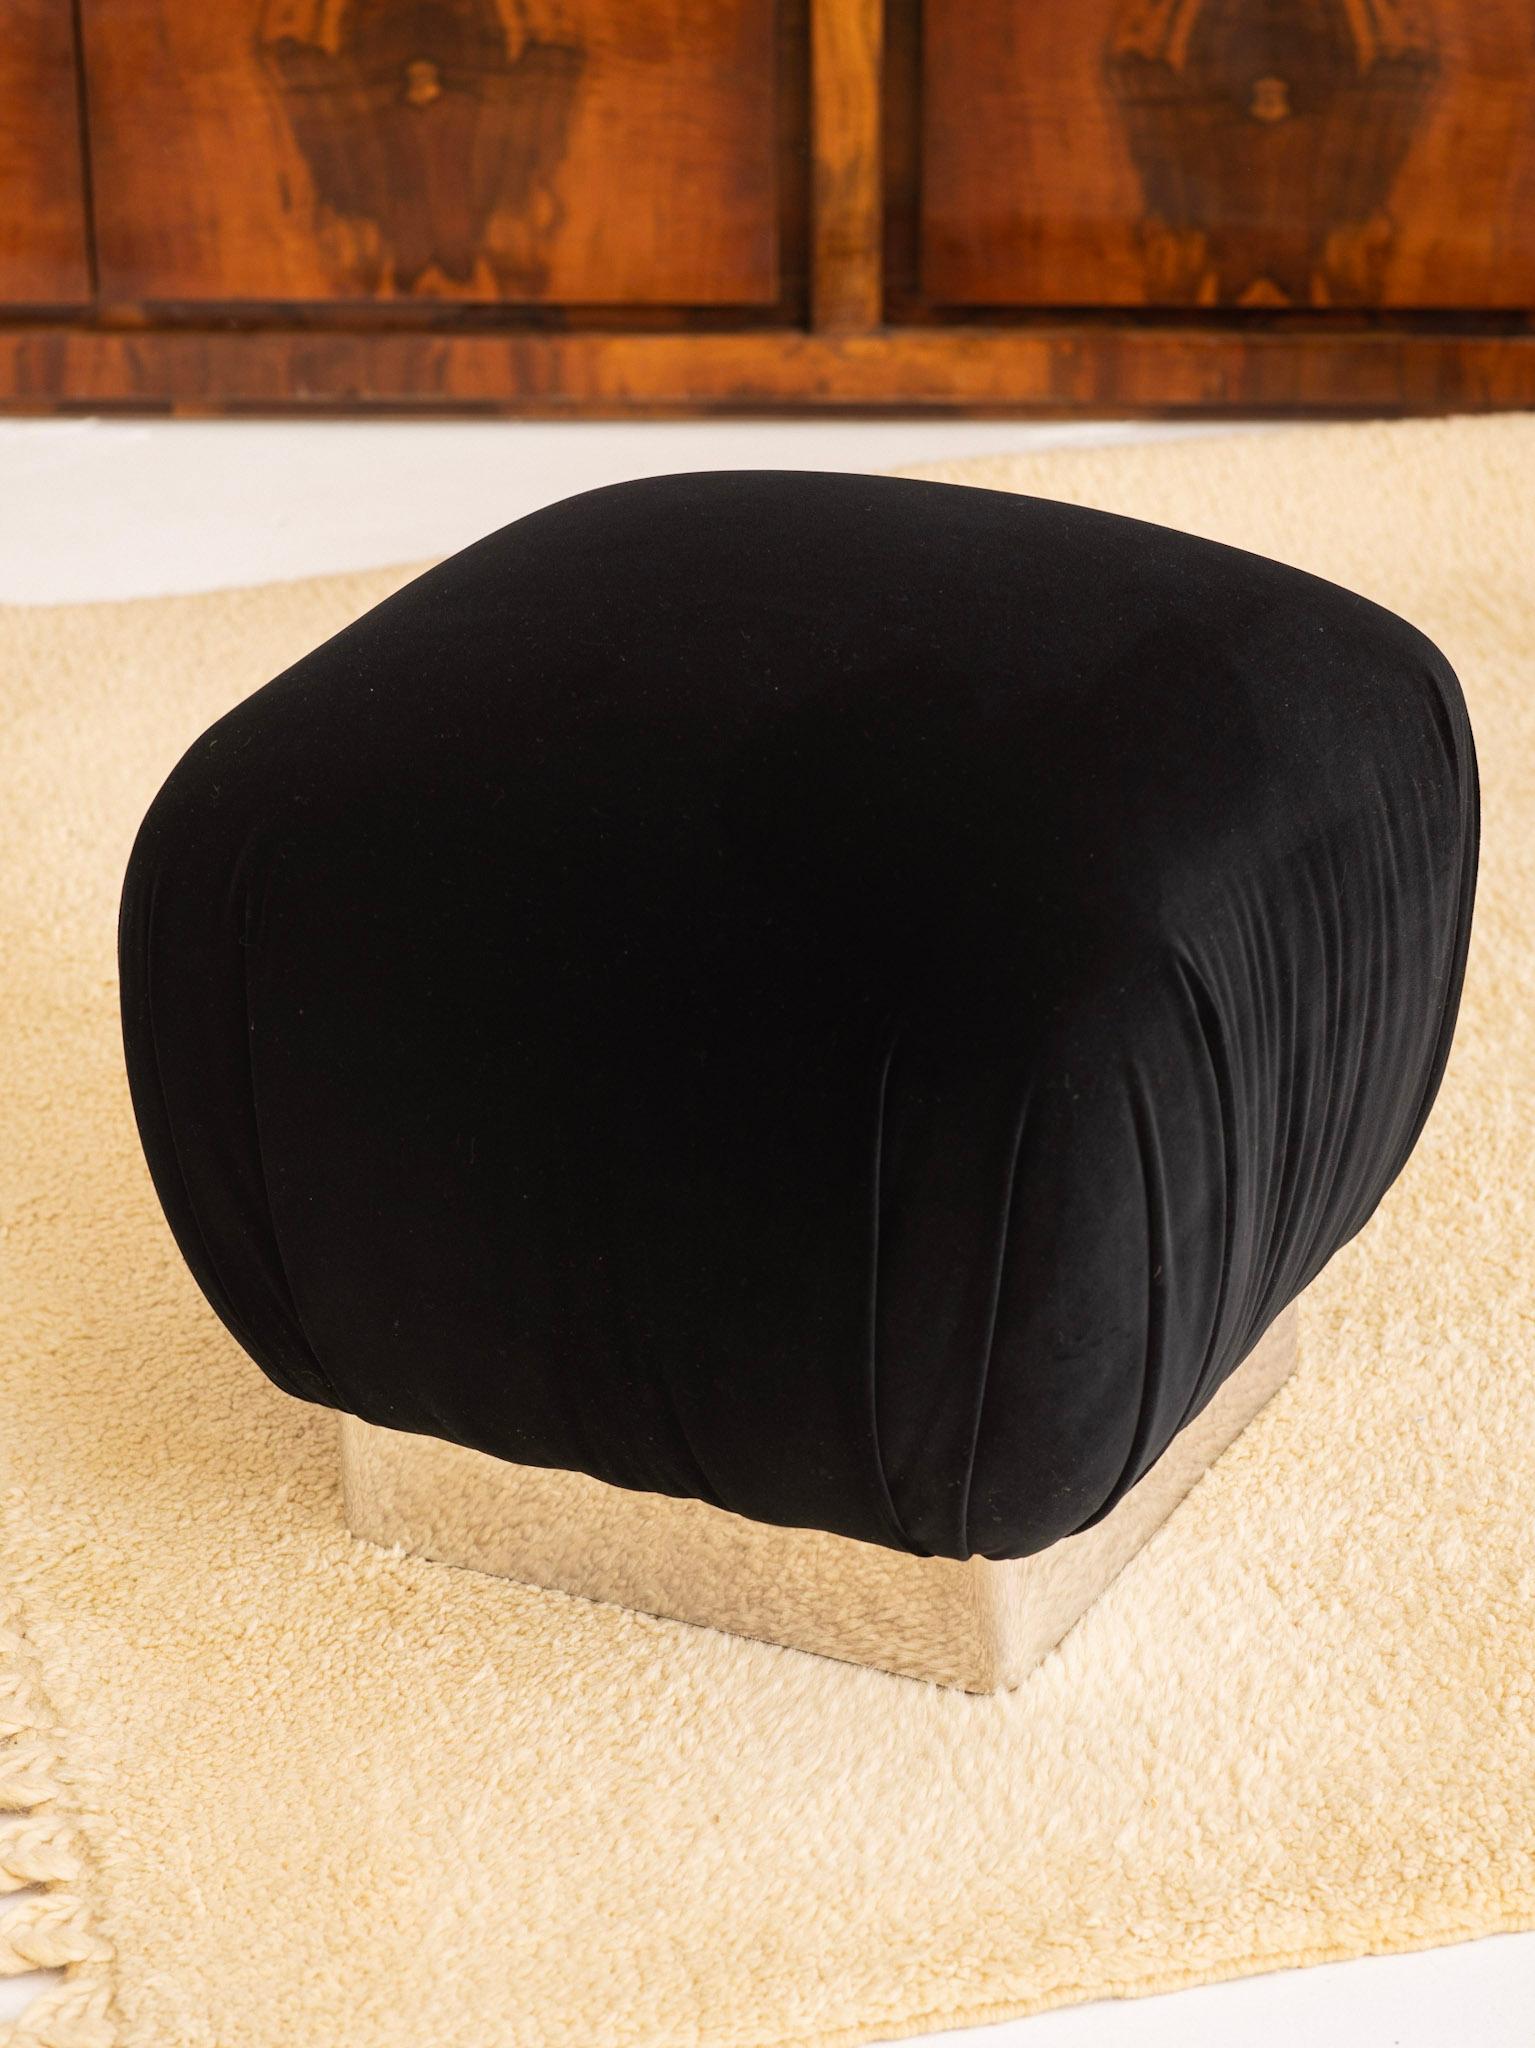 Classic Hollywood Regency soufflé ottoman in the style of Karl Springer. Pleated black velvet upholstery and chrome plinth base.